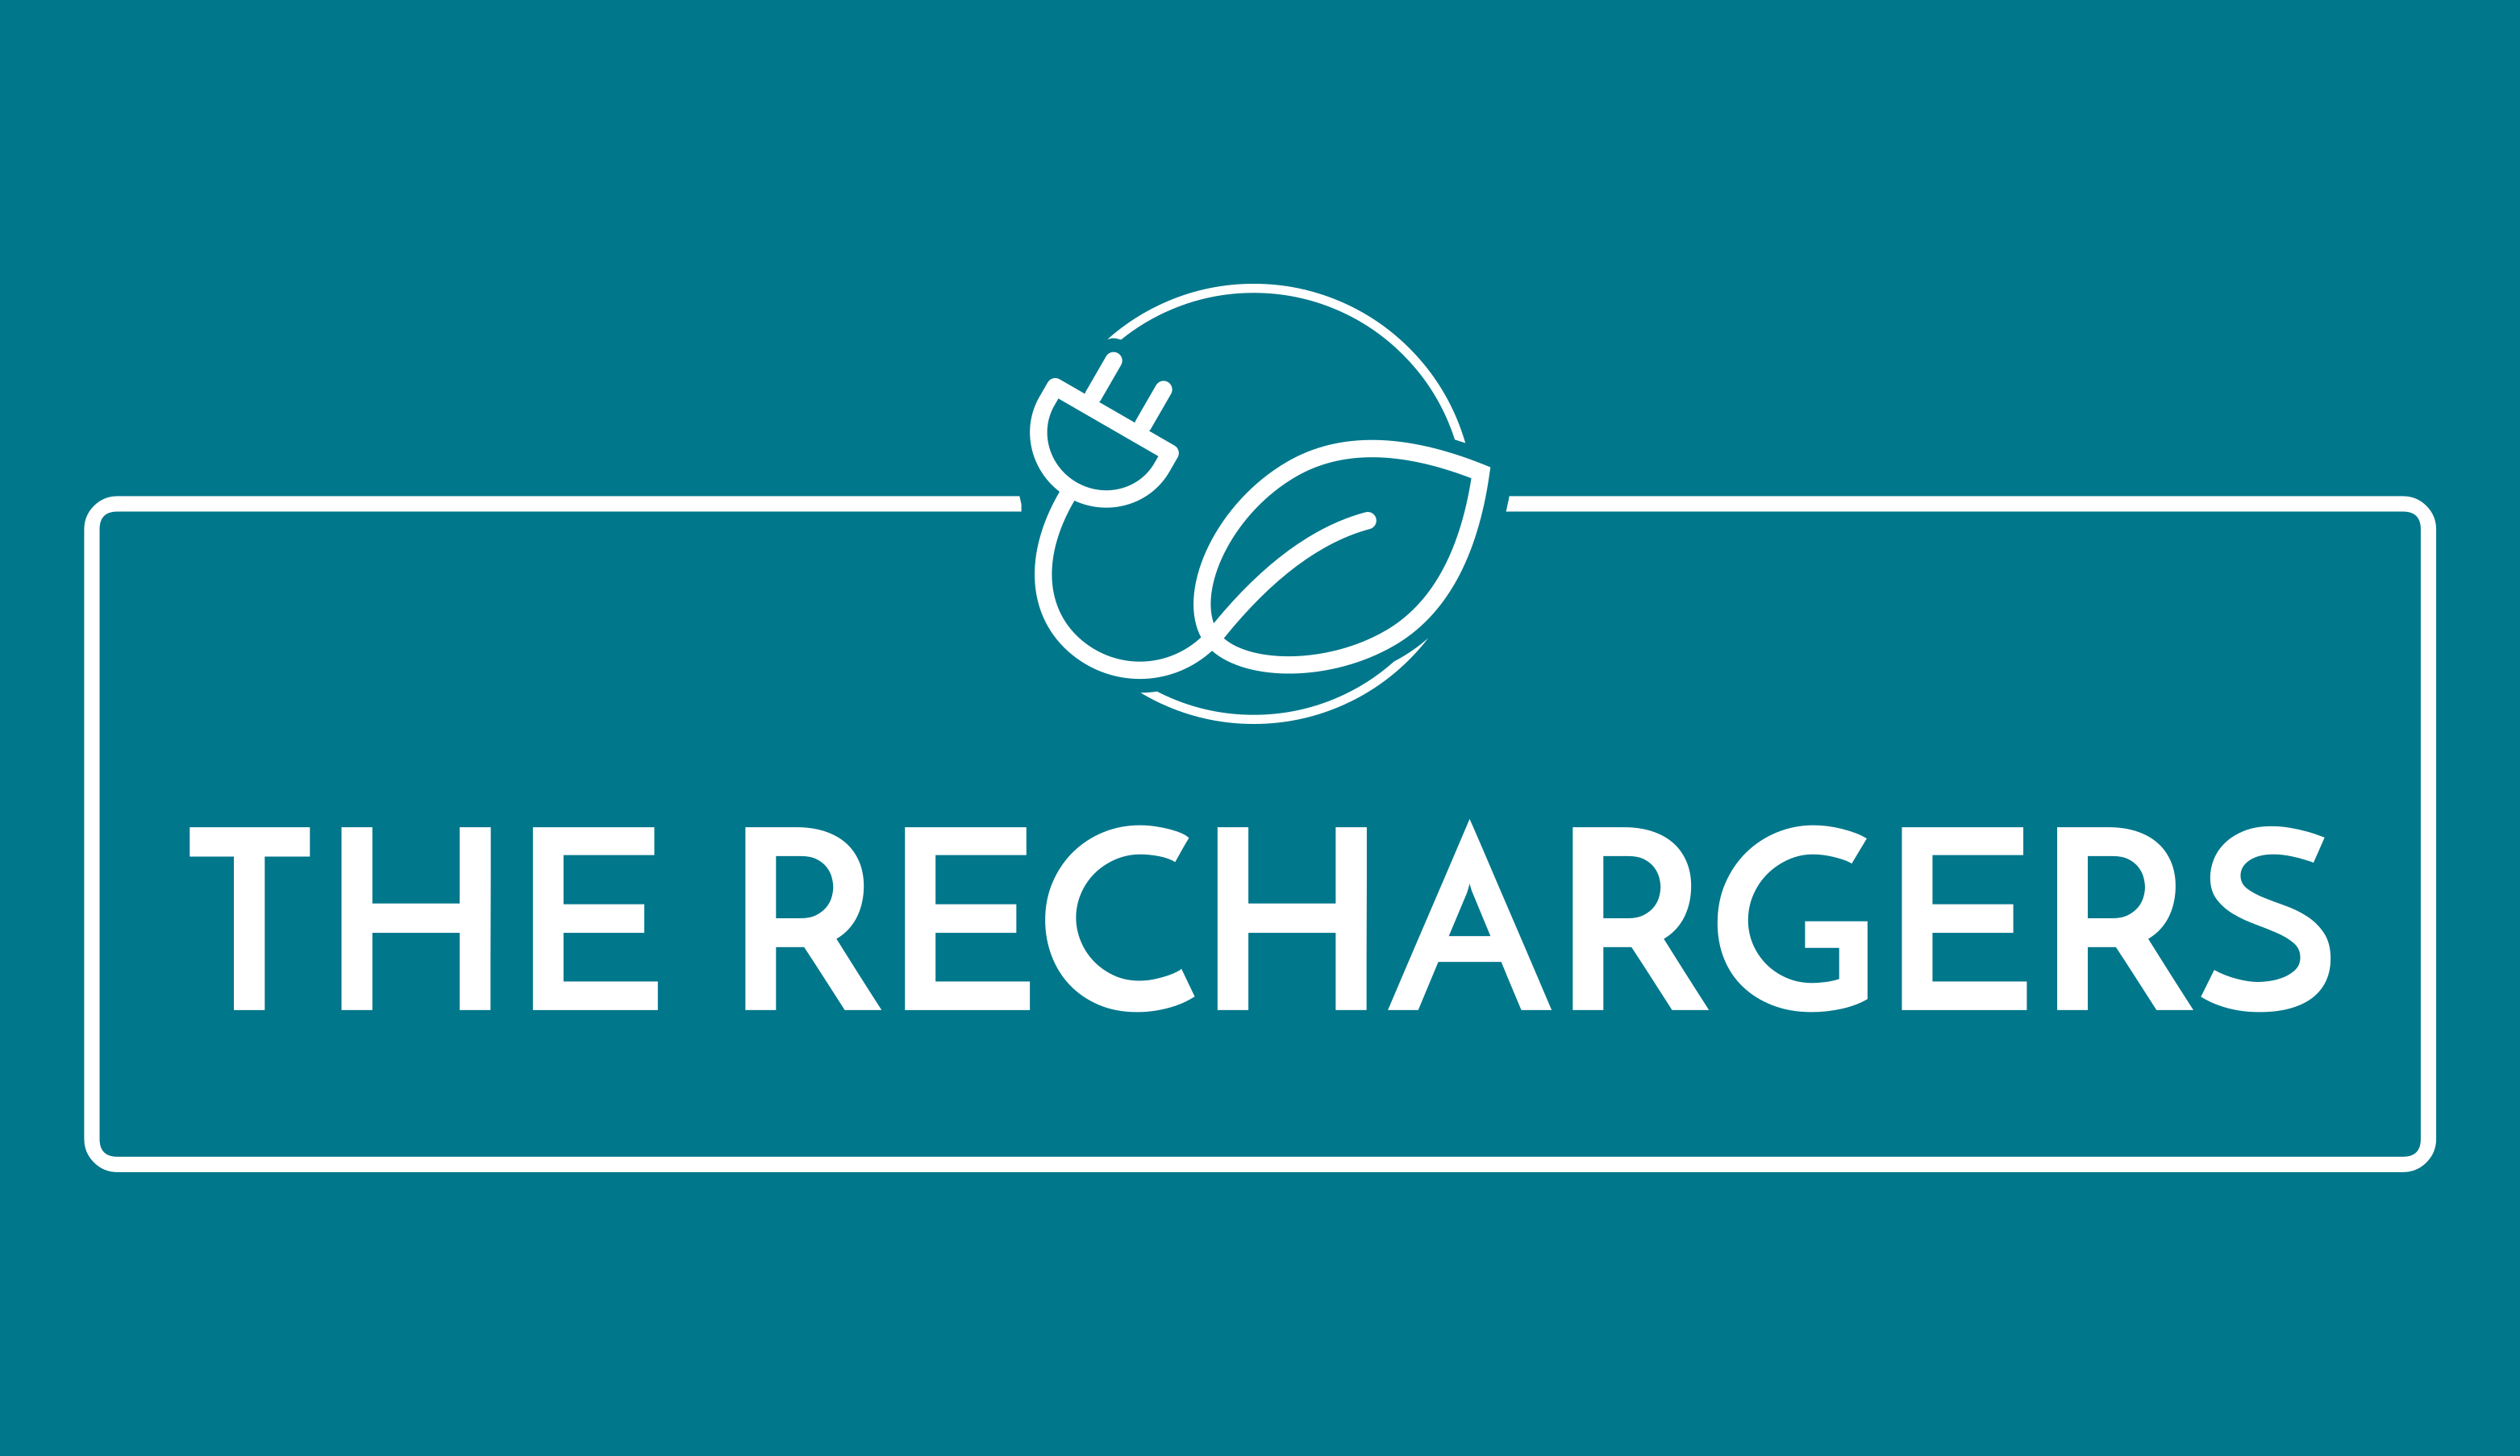 The Rechargers logo